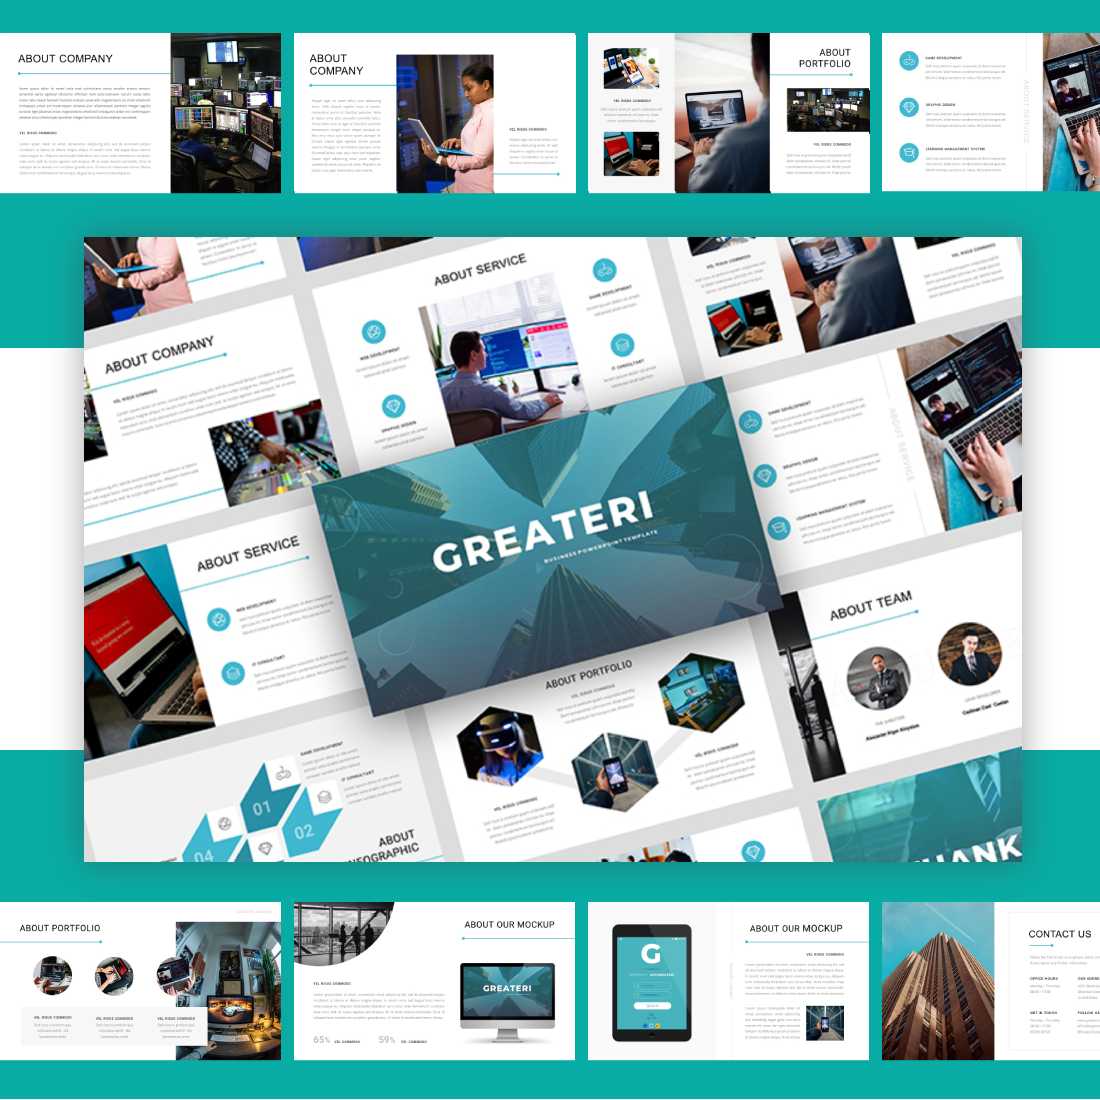 Greateri – Business Keynote Template cover image.